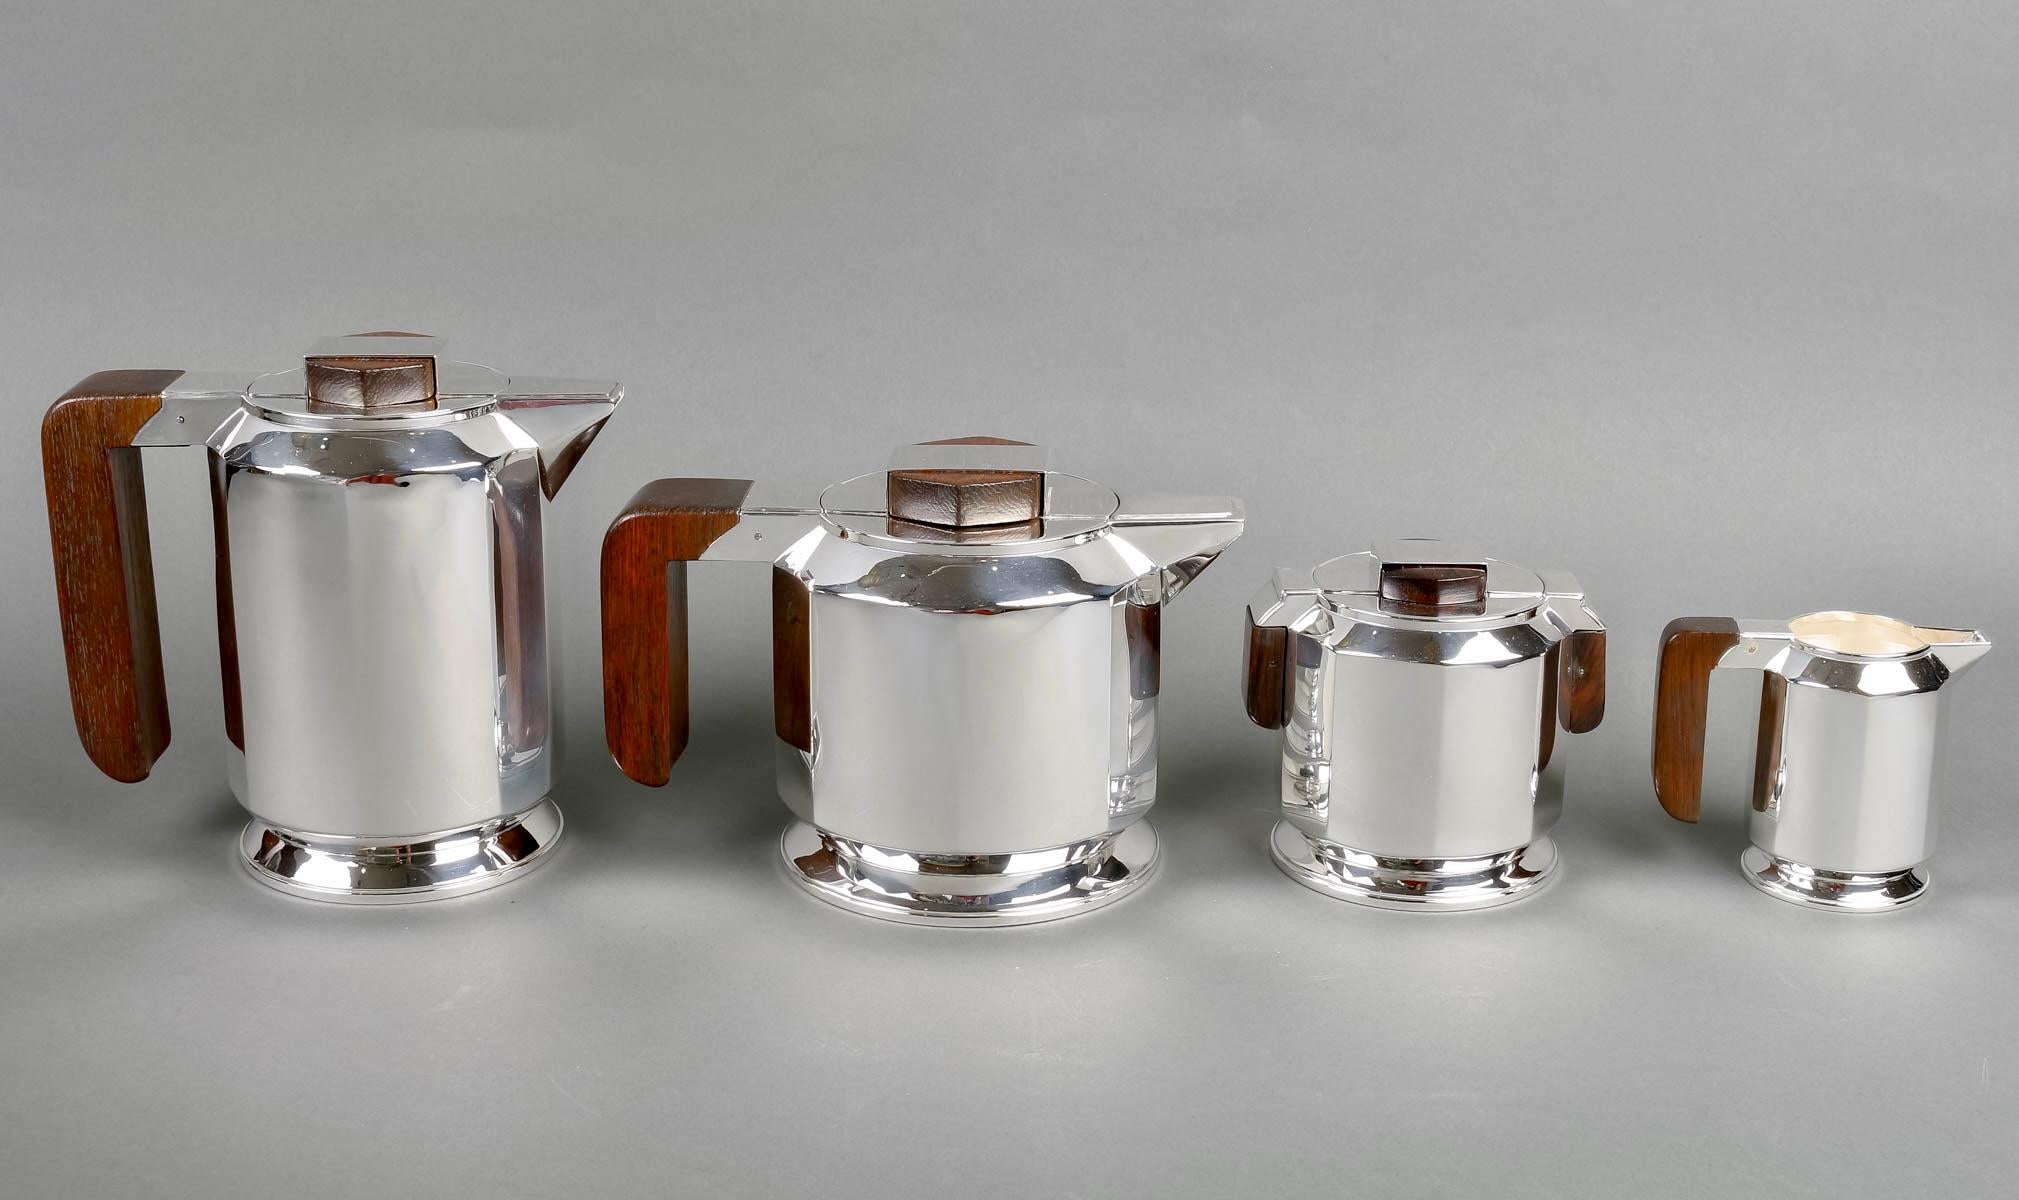 Modernist Art Deco tea and coffee egoiste set in sterling pure silver and rosewood by Jean E. Puiforcat created in 1925 for the shop Saks on 5th Avenue in NYC. 

Service including:
- a coffee pot 
- a teapot
- a milkpot
- a sugar pot

Minerve Solid